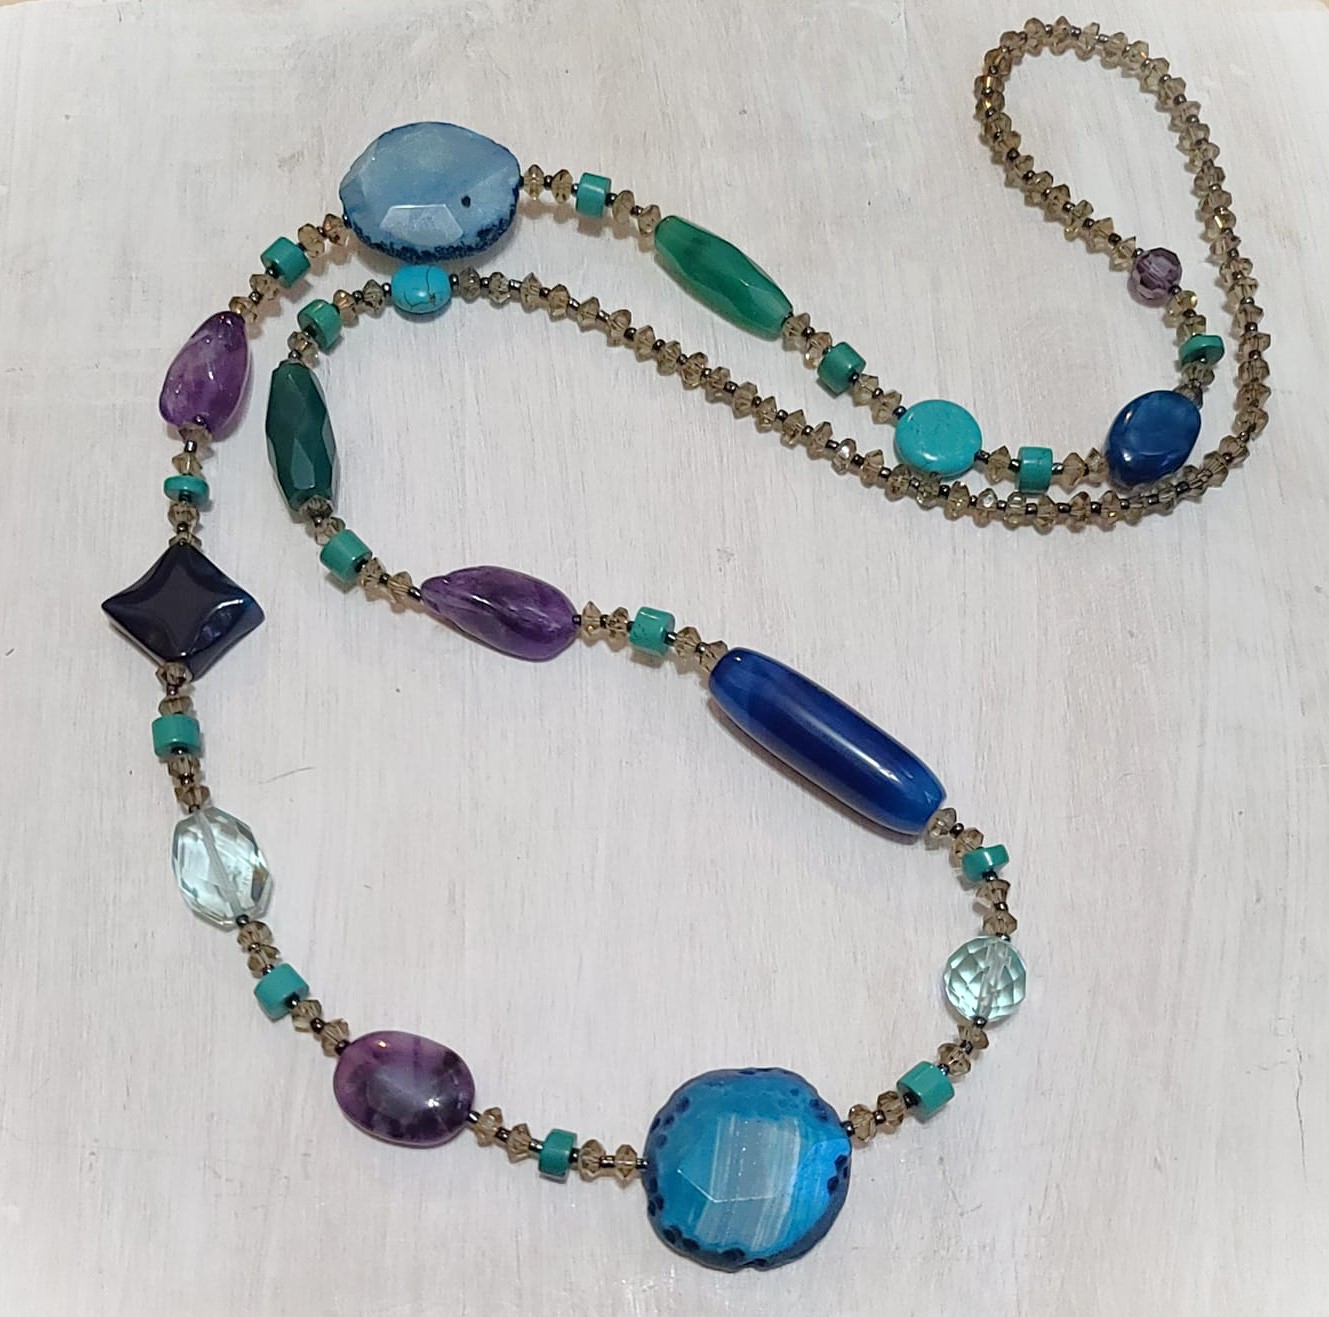 Blue Agate, Amethyst,Turquoise & Glass Bead Necklace 37"